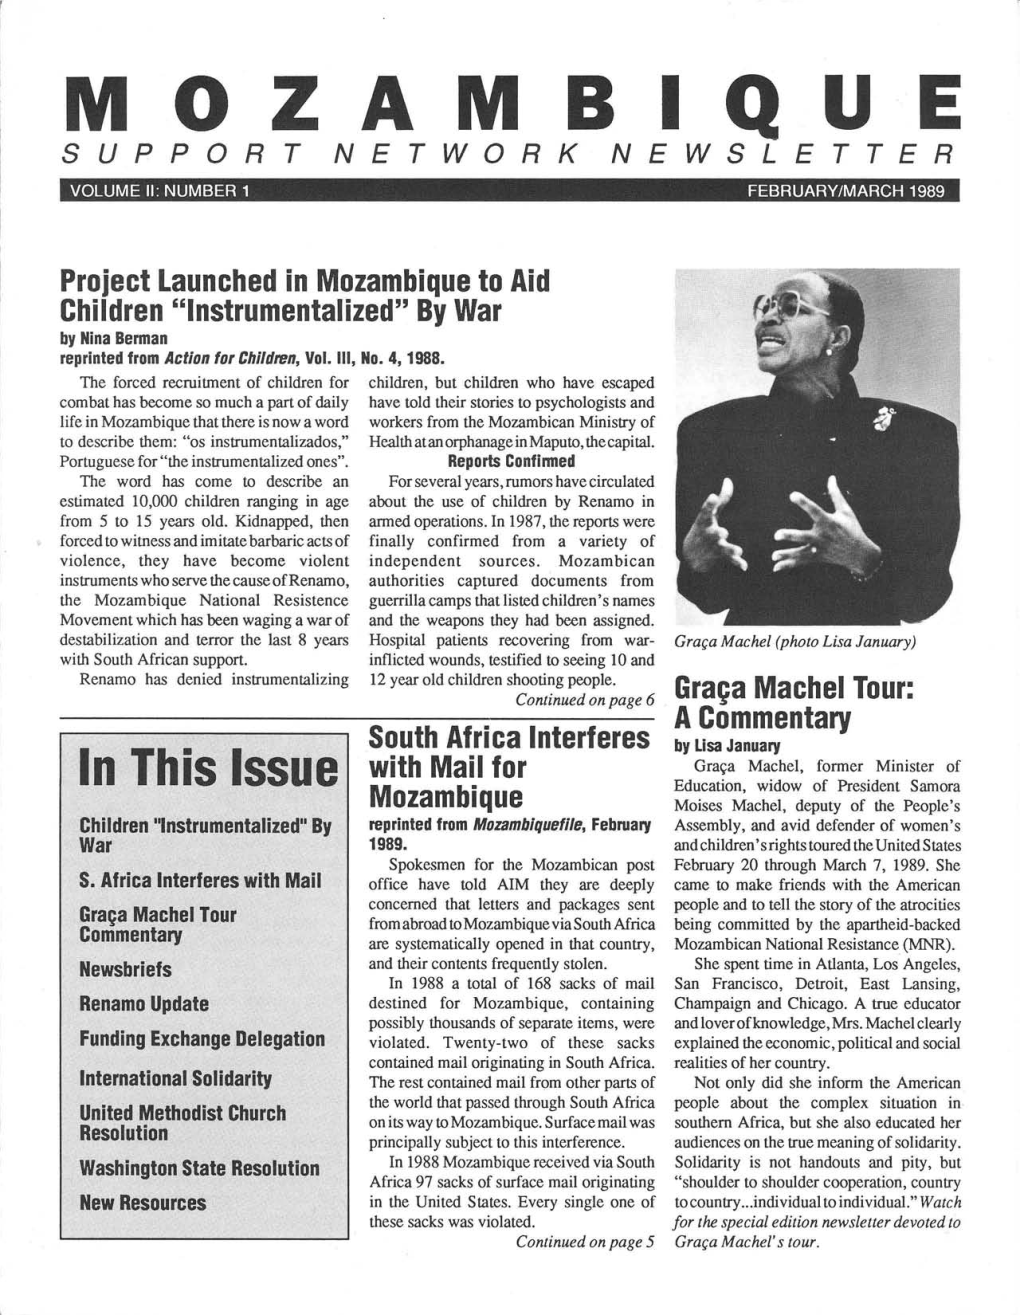 Mozambique Support Network Newsletter Volume Ii: Number 1 February/March 1989